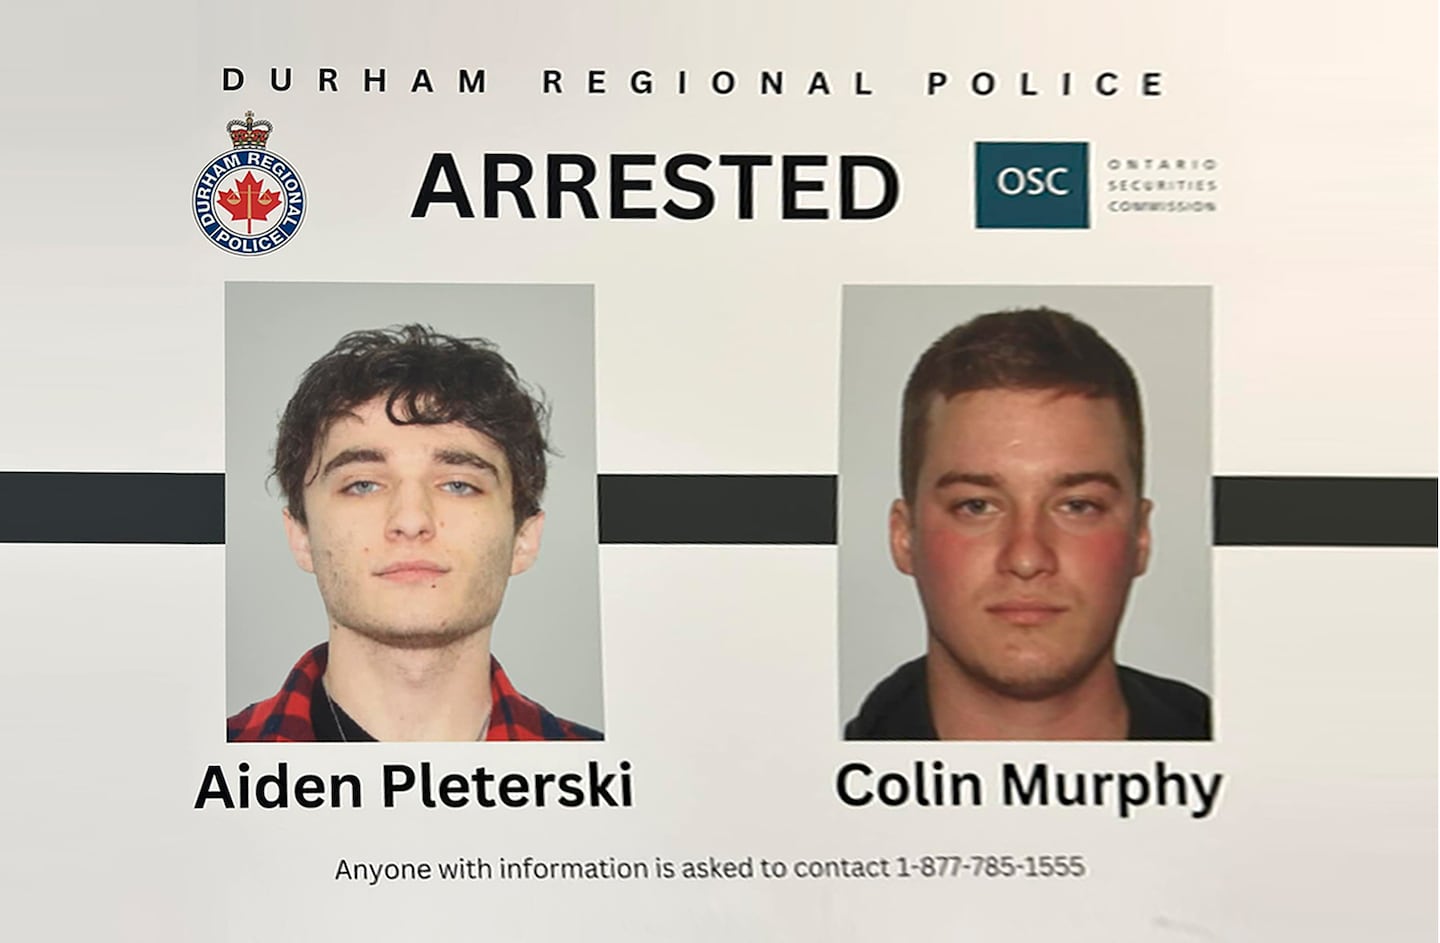 An illustration of Aiden Pleterski and Colin Murphy arrested.